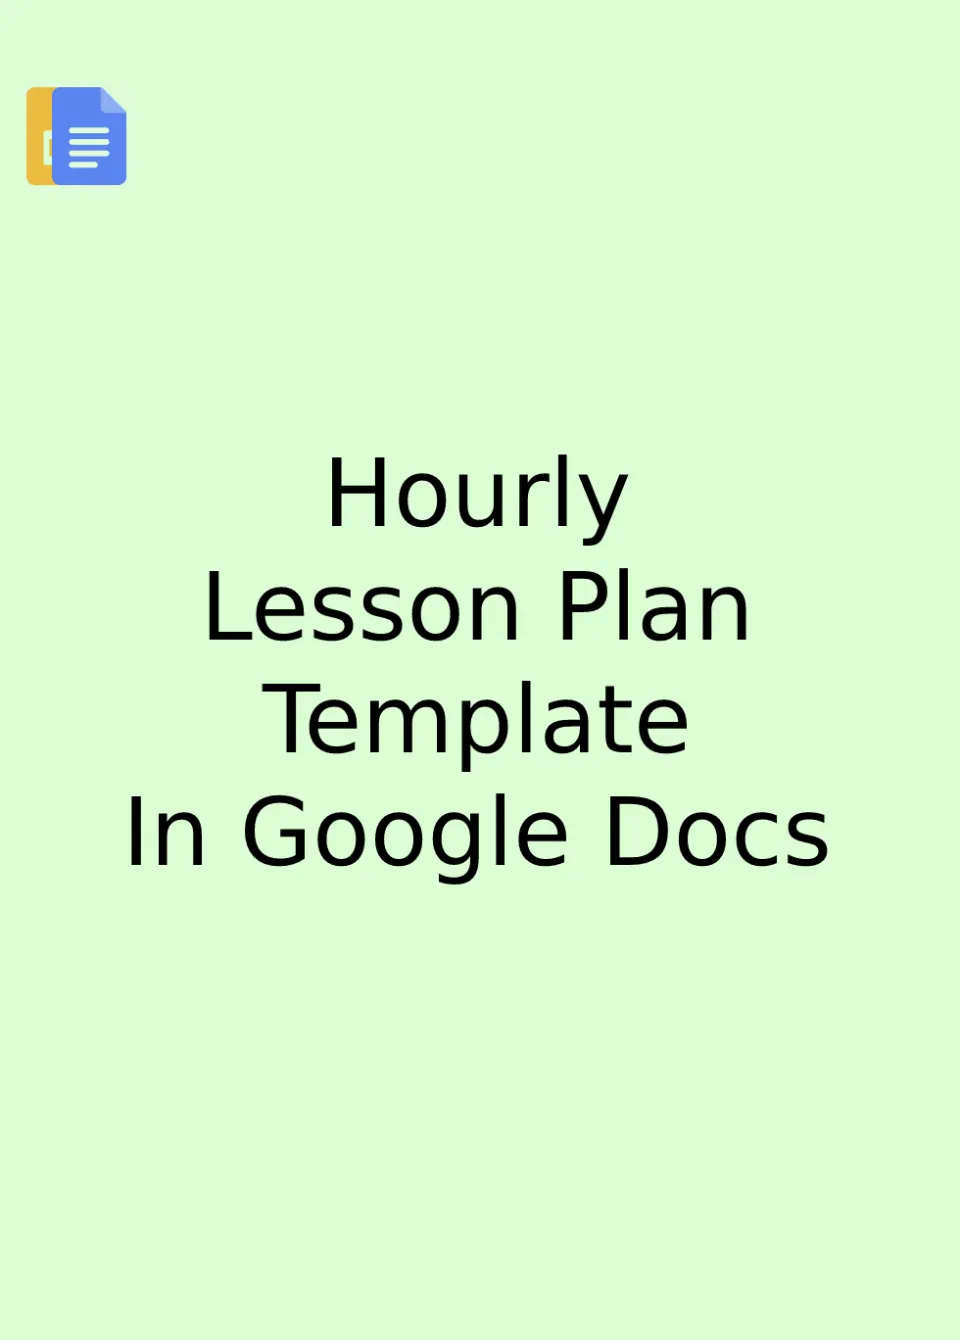 Hourly Lesson Plan Template Google Docs